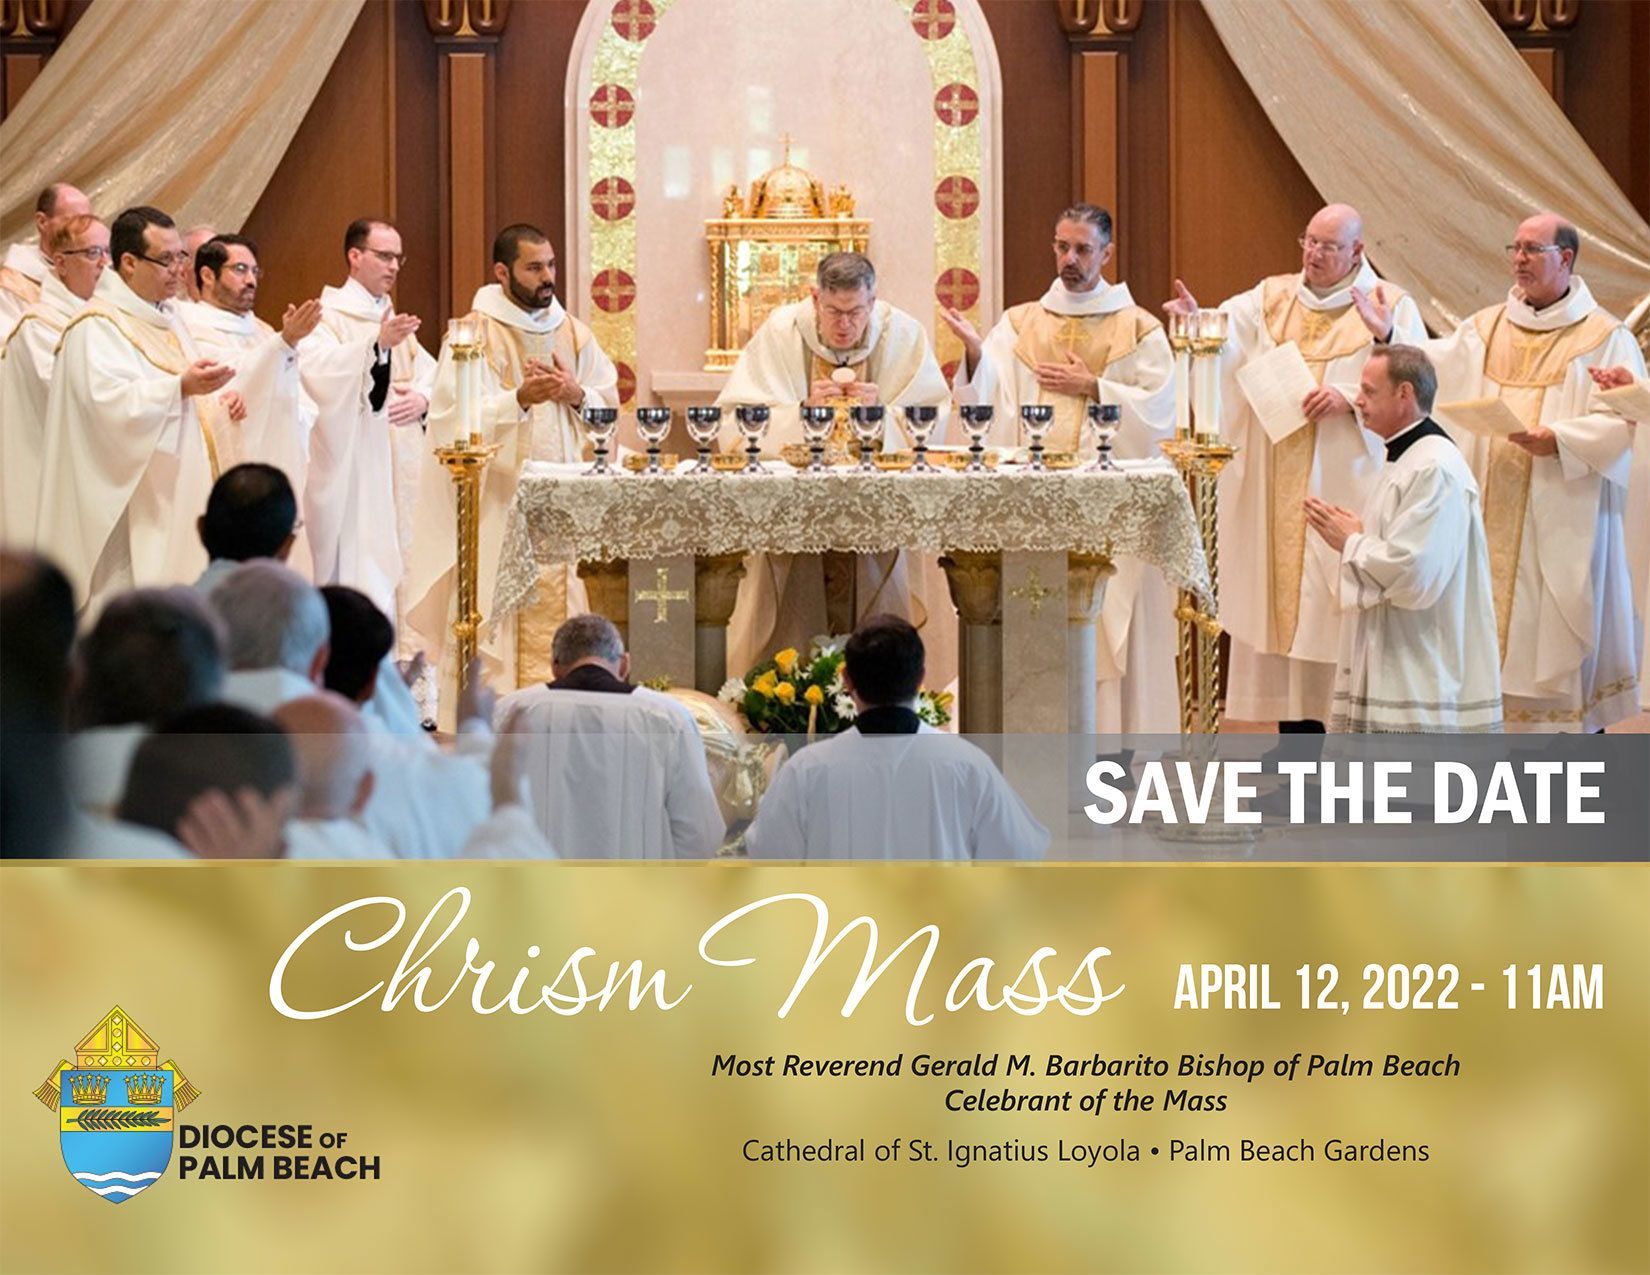 Join us for the Chrism Mass on April 12